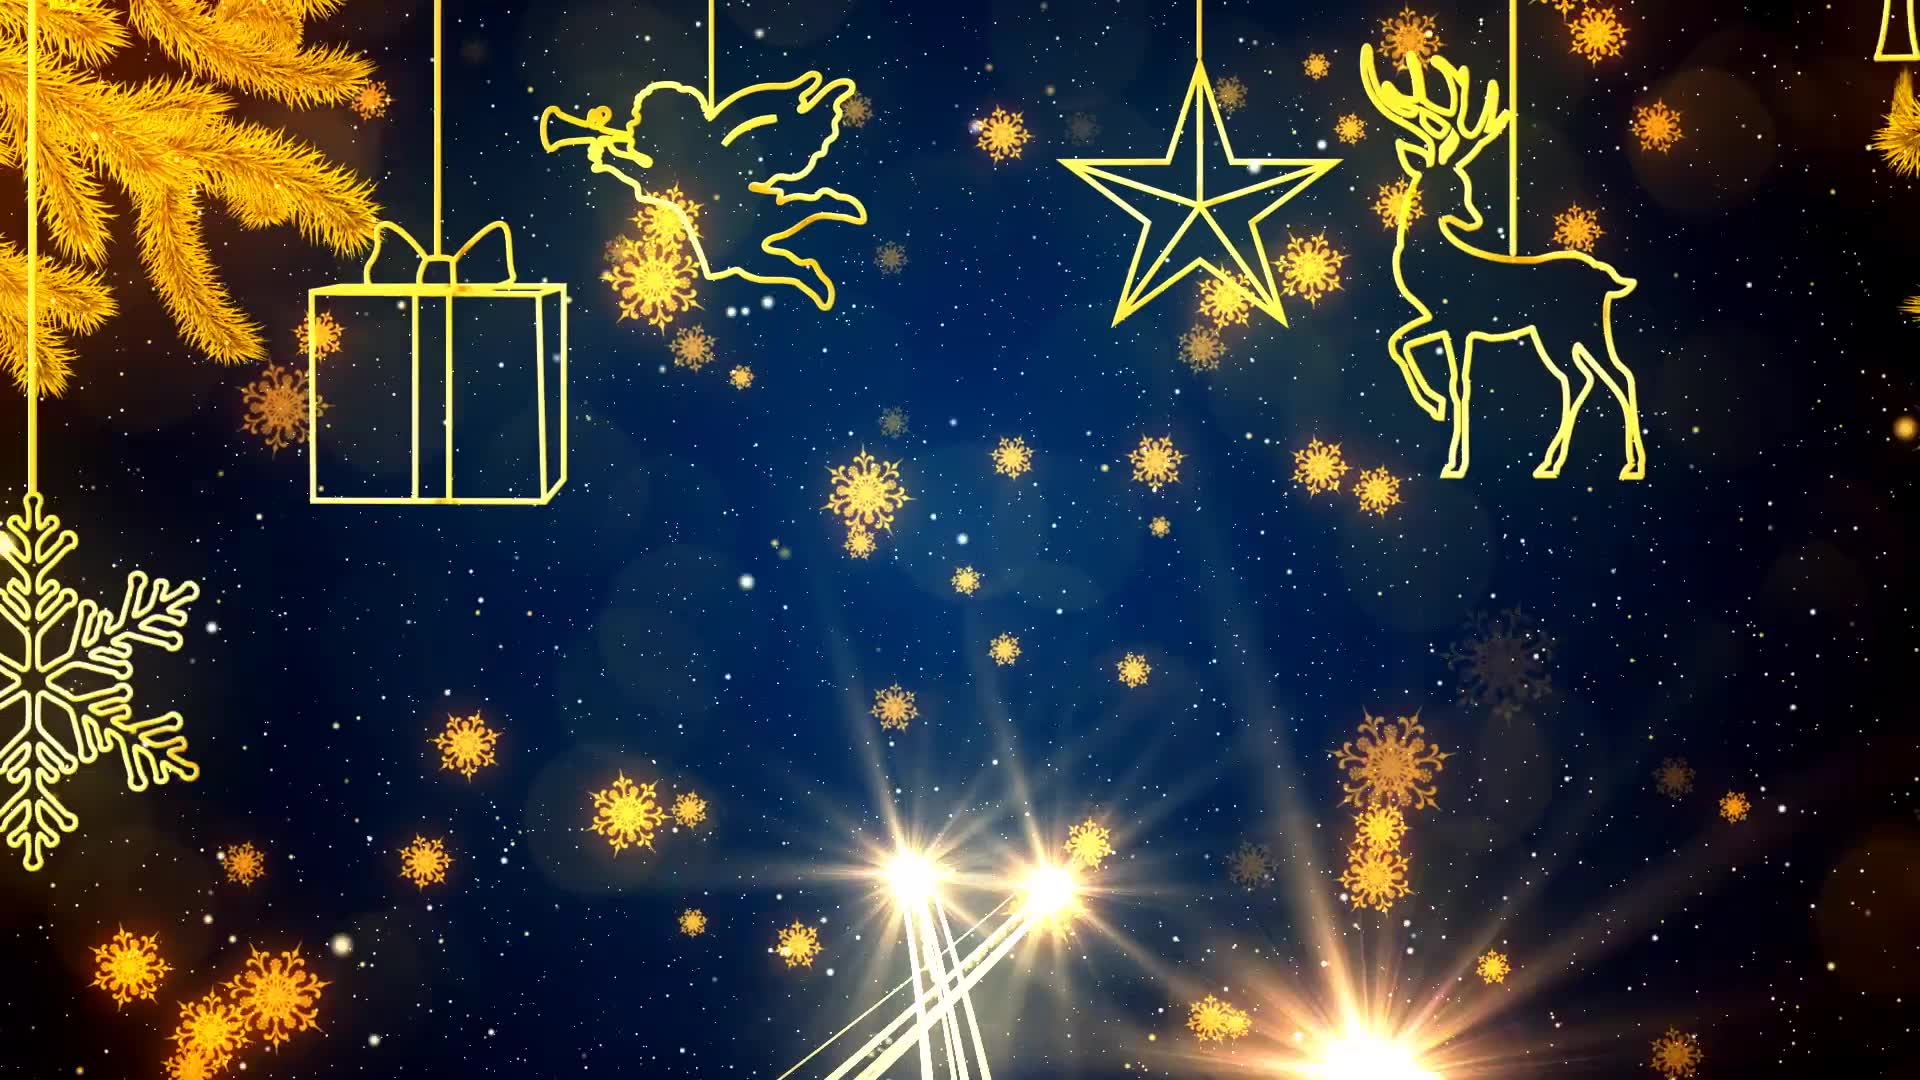 Christmas Wishes - Download Videohive 22862865